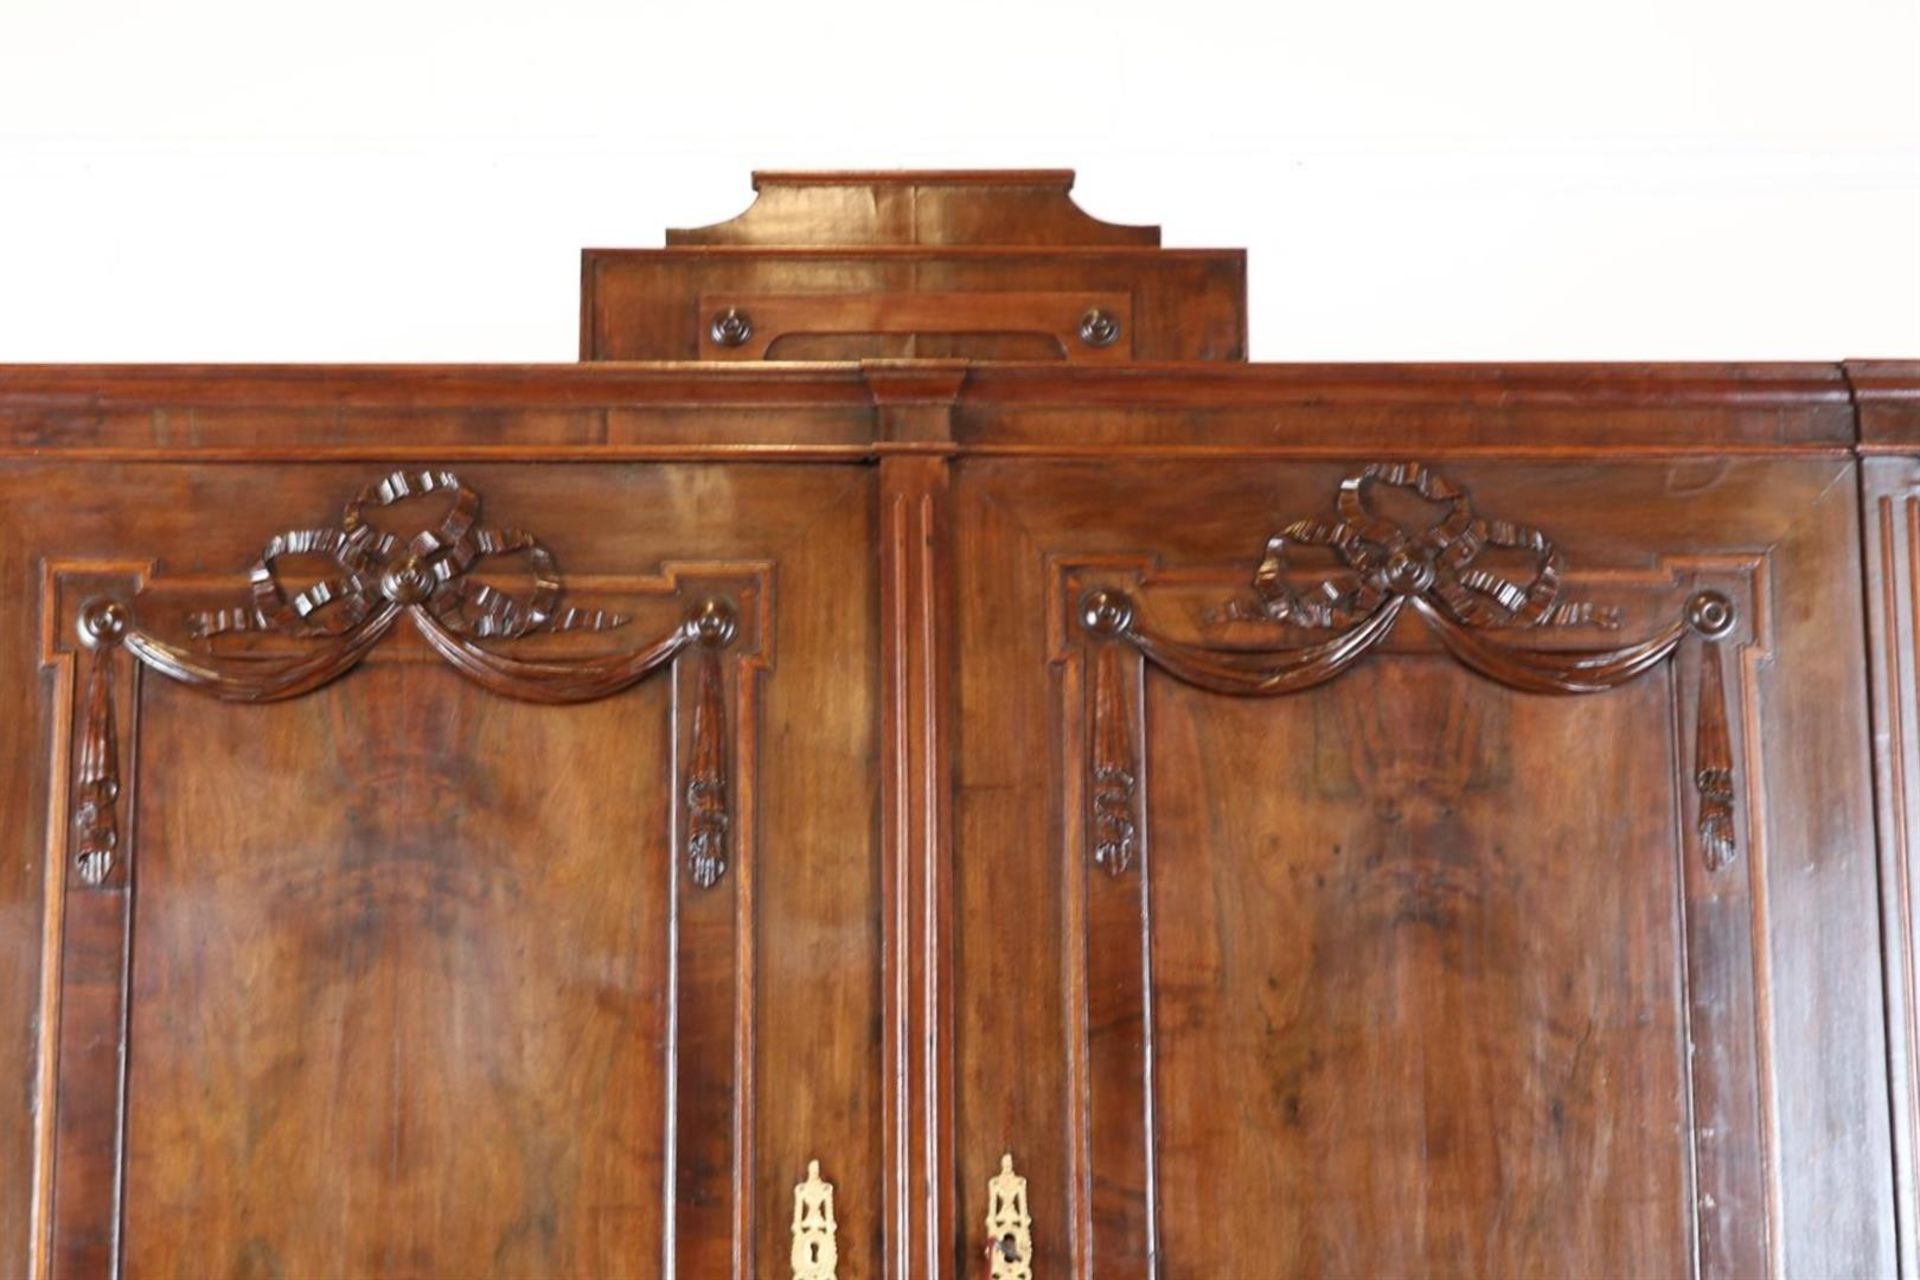 Mahogany Louis XVI cabinet, 2 panel doors with carved garlands and 4 drawers with bronze fittings, - Image 3 of 7